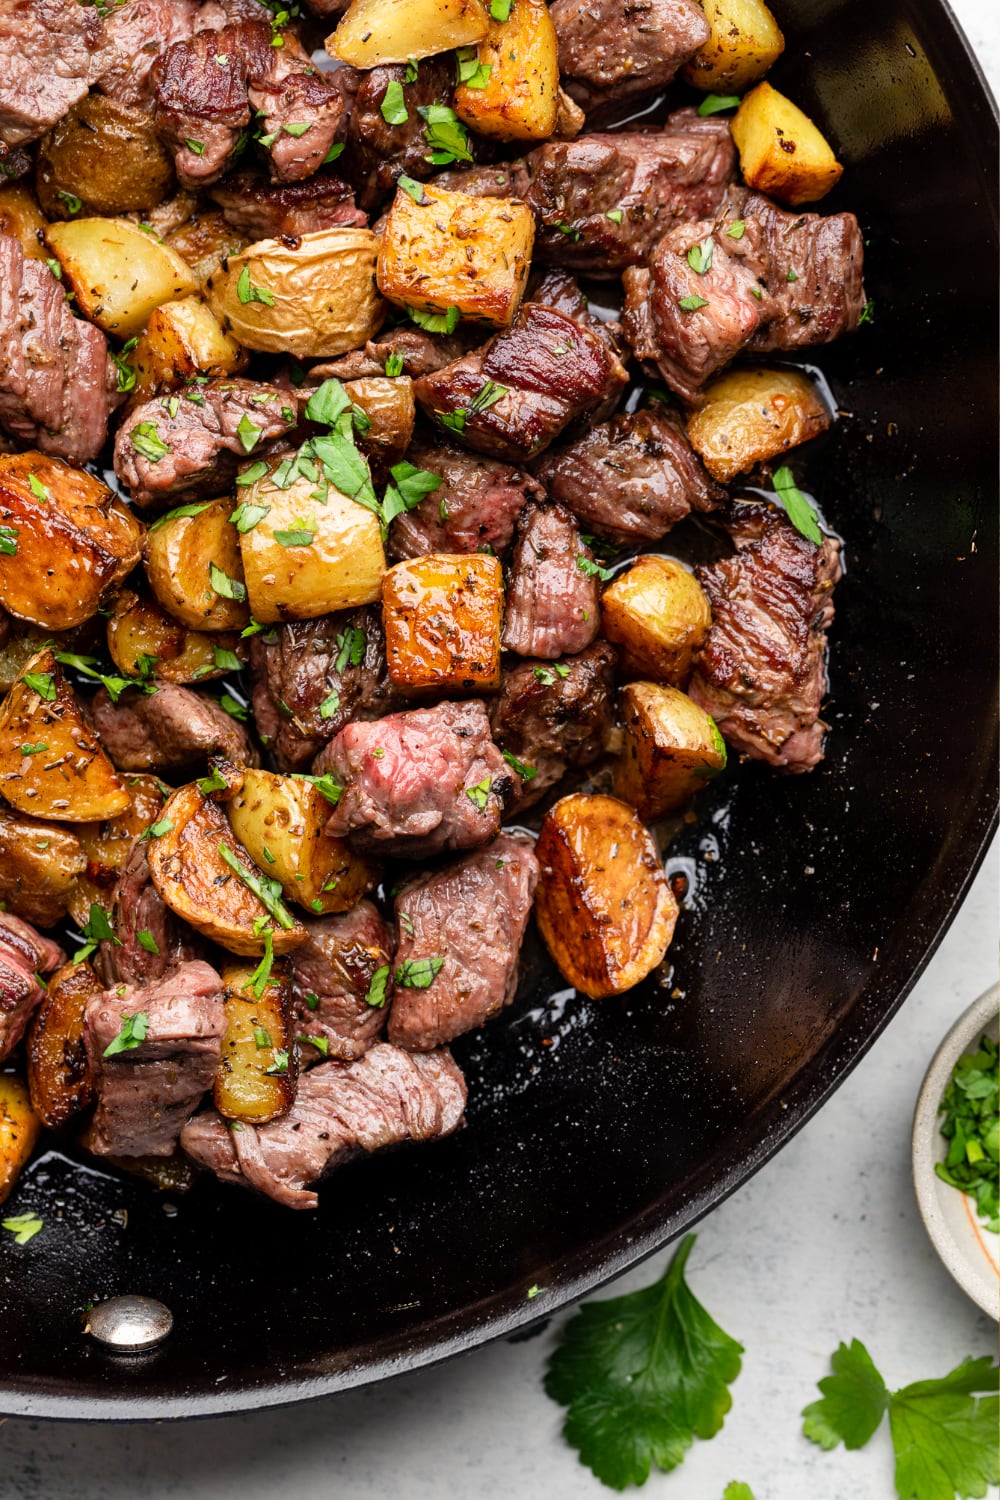 Steak bites and potatoes finished in a skillet with parsley on top.